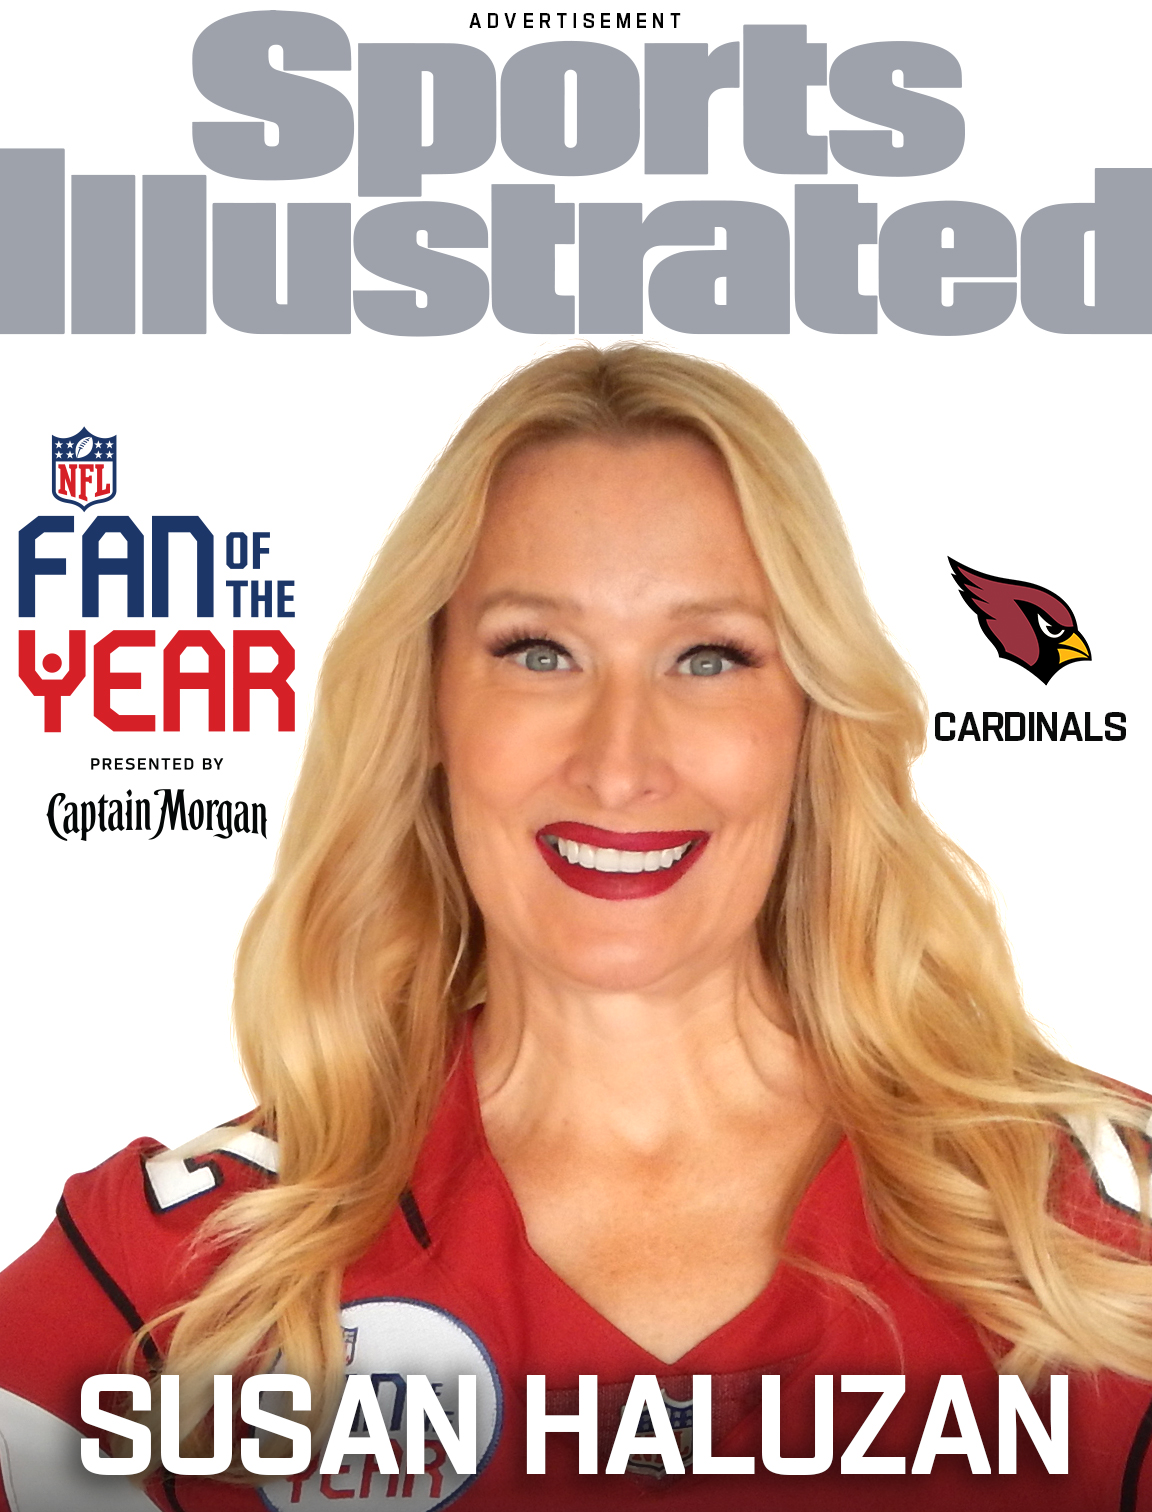 Arizona Cardinals Fan of the Year Susan Haluzan will appear in a high-impact cover peel ad execution and custom spread creative in the February issue of Sports Illustrated.